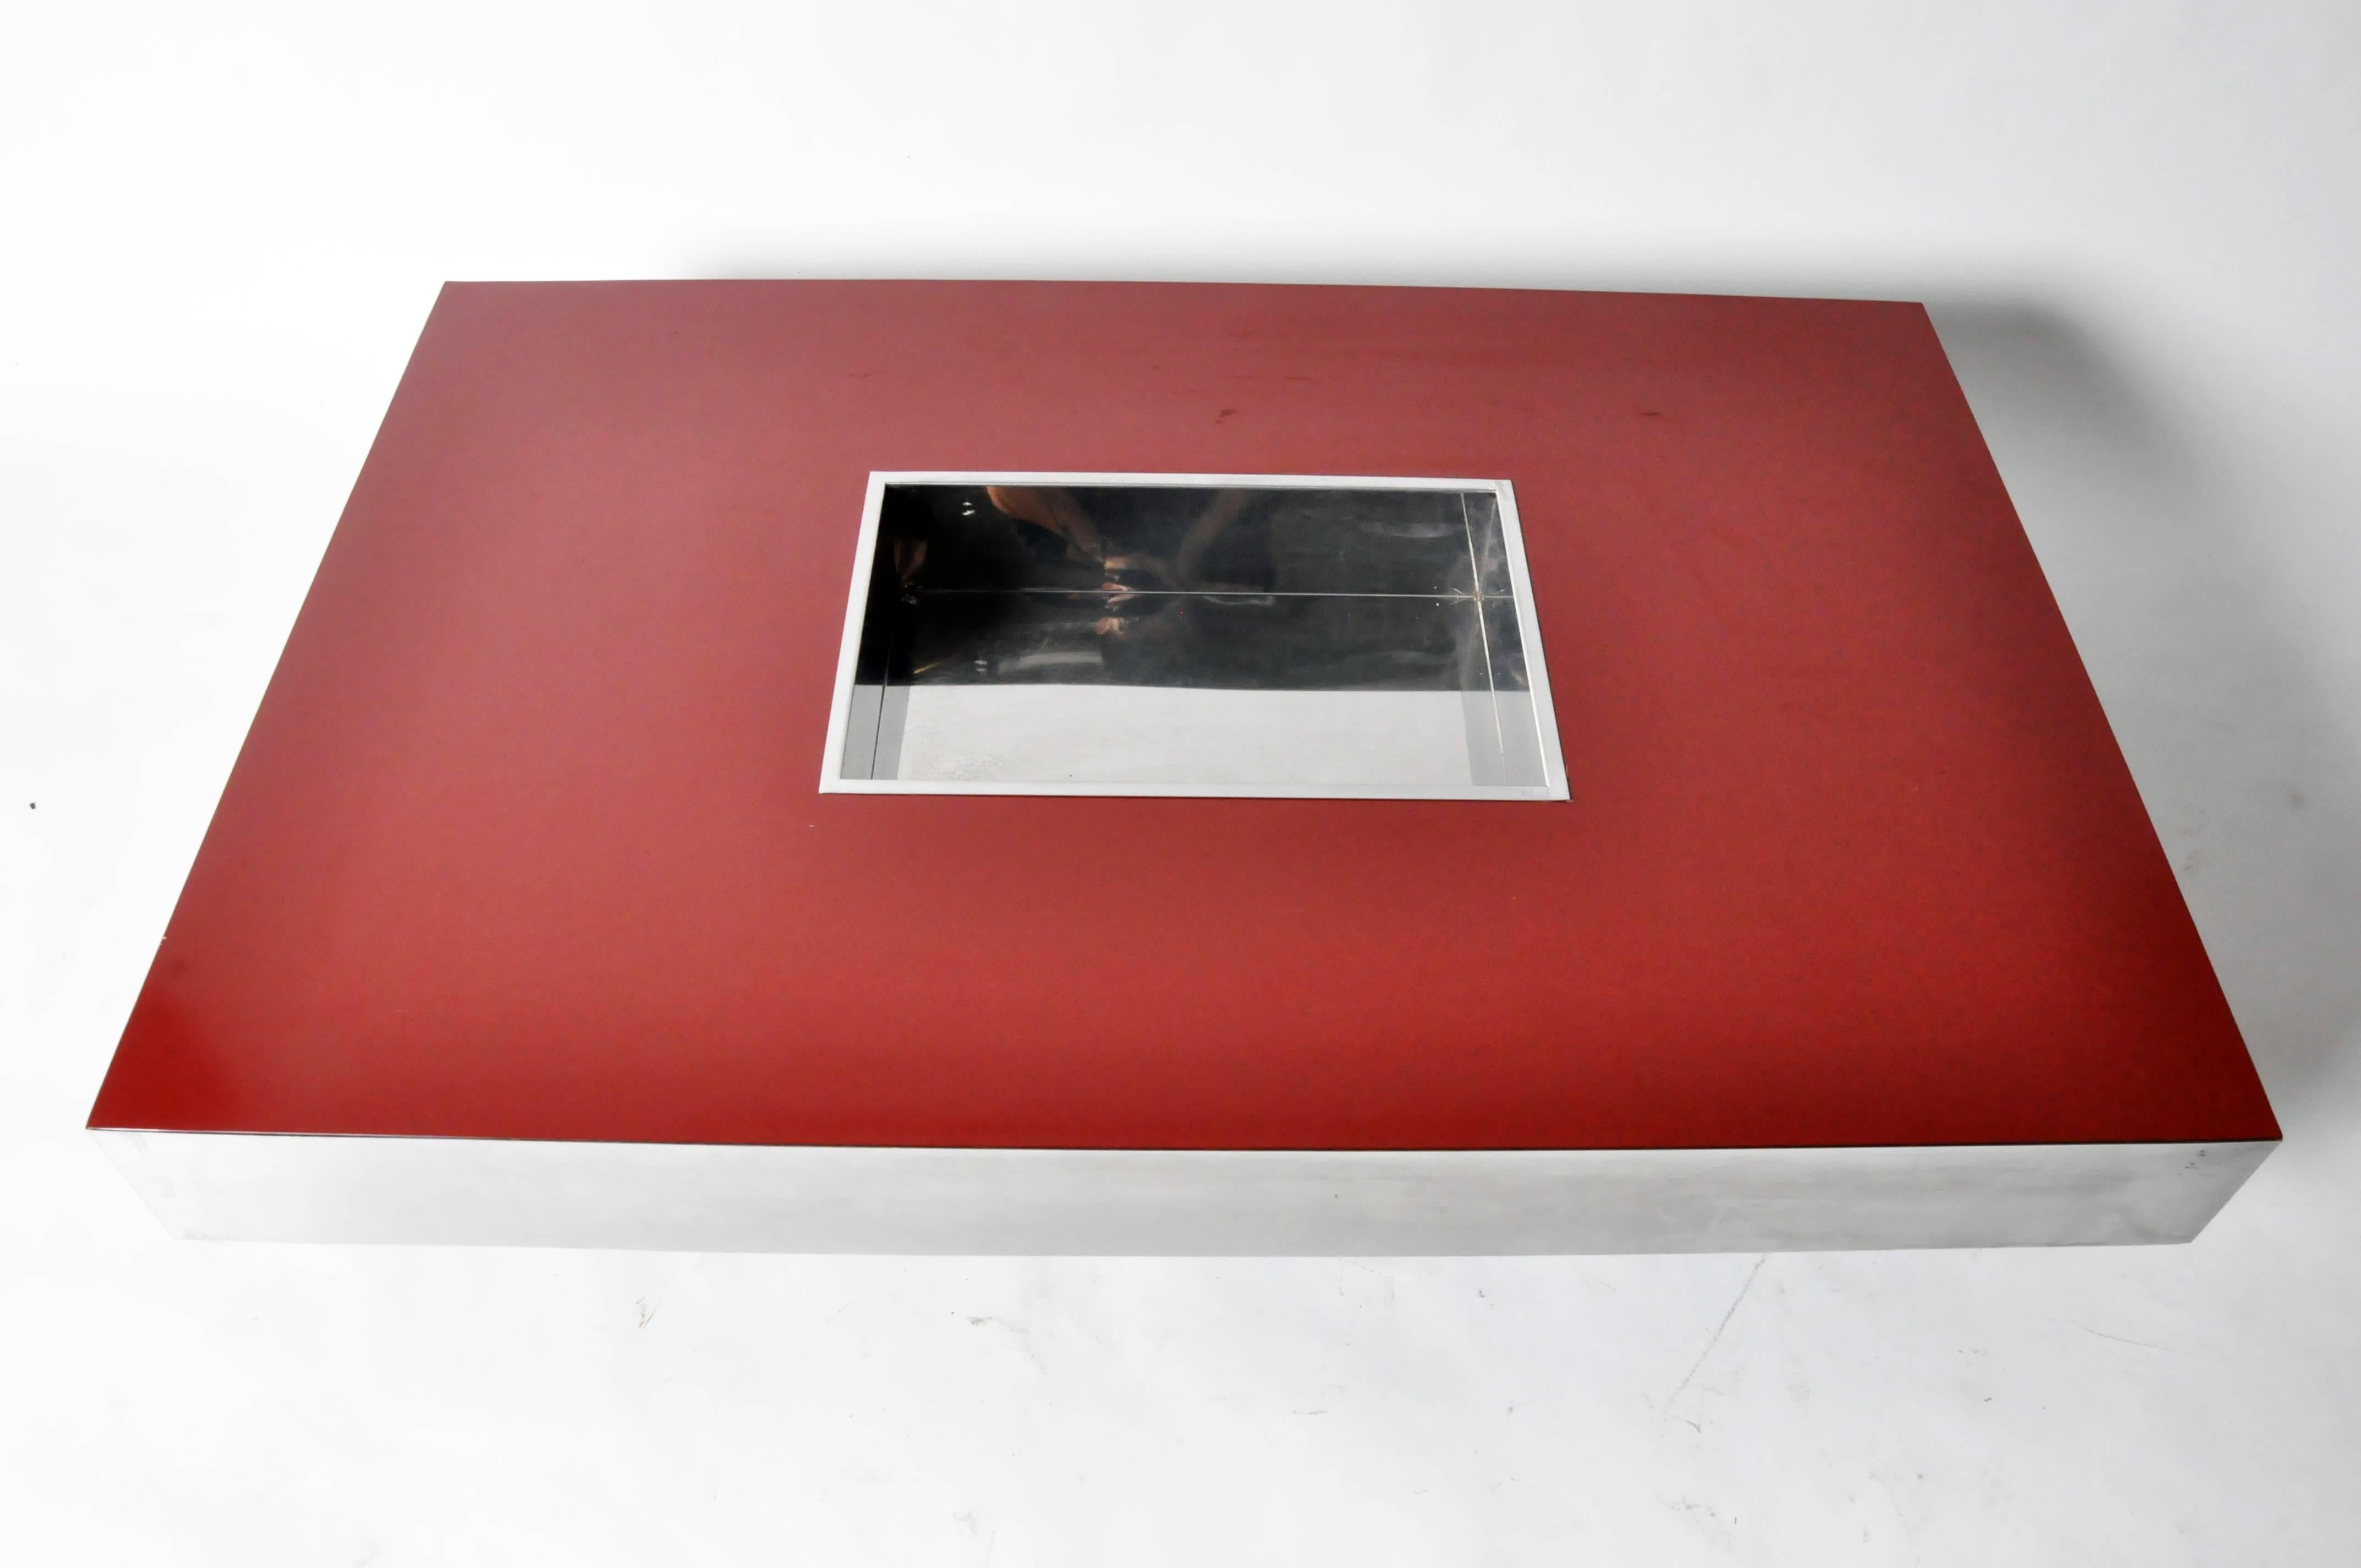 20th Century Mid-Century Modern Coffee Table Attributed to Willy Rizzo for Pierre Cardin